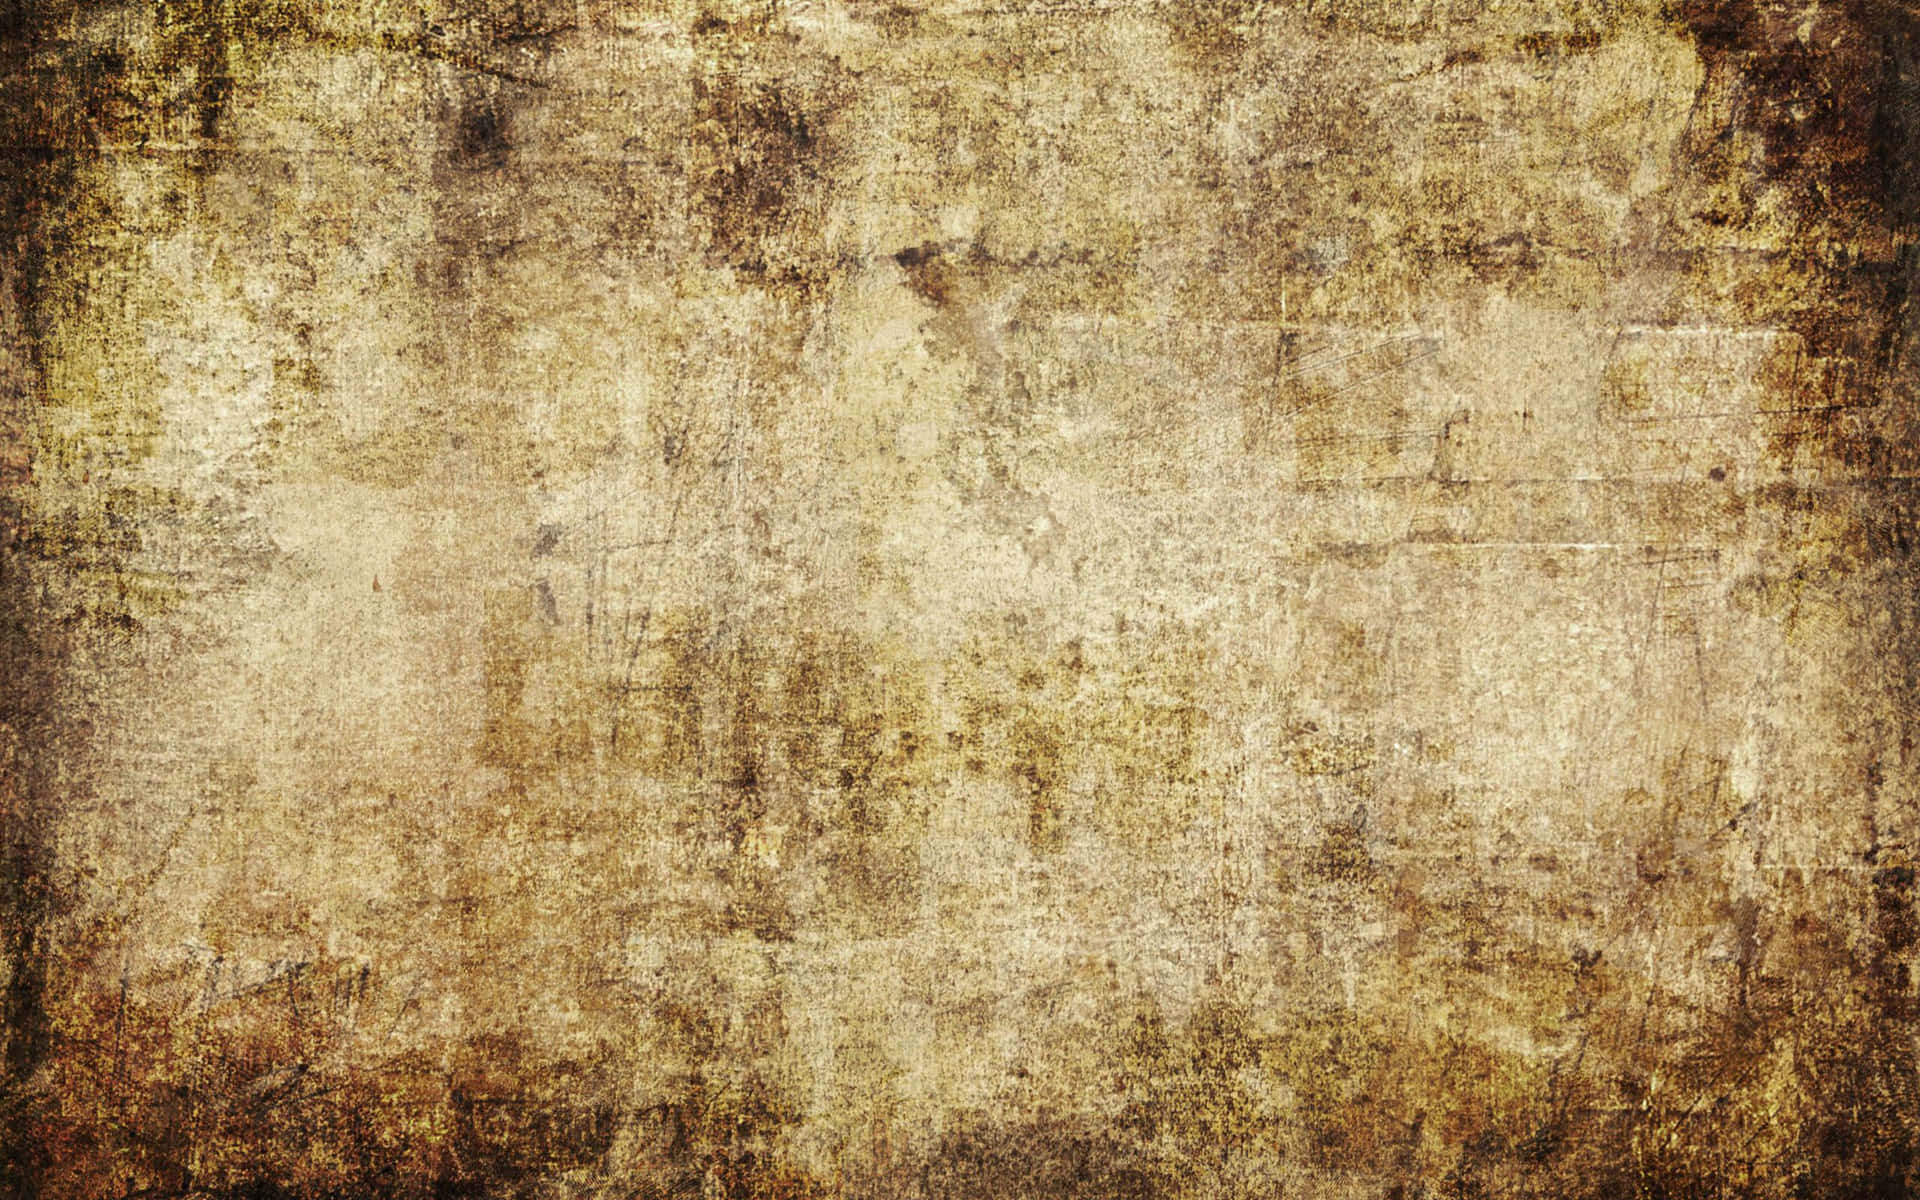 Grunge Texture Background With A Brown Color Wallpaper